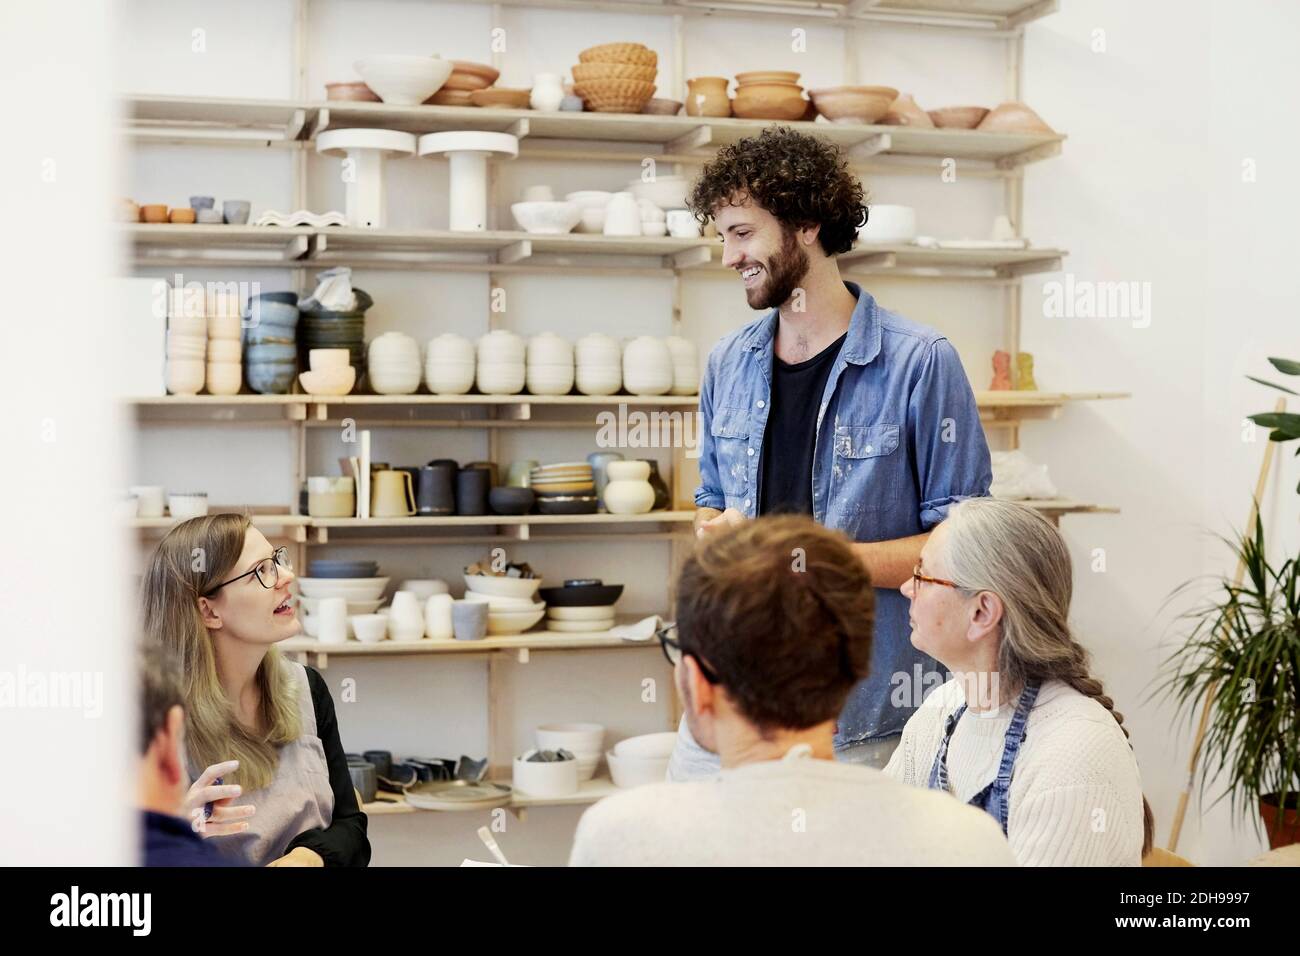 Smiling man talking with woman in art class Stock Photo